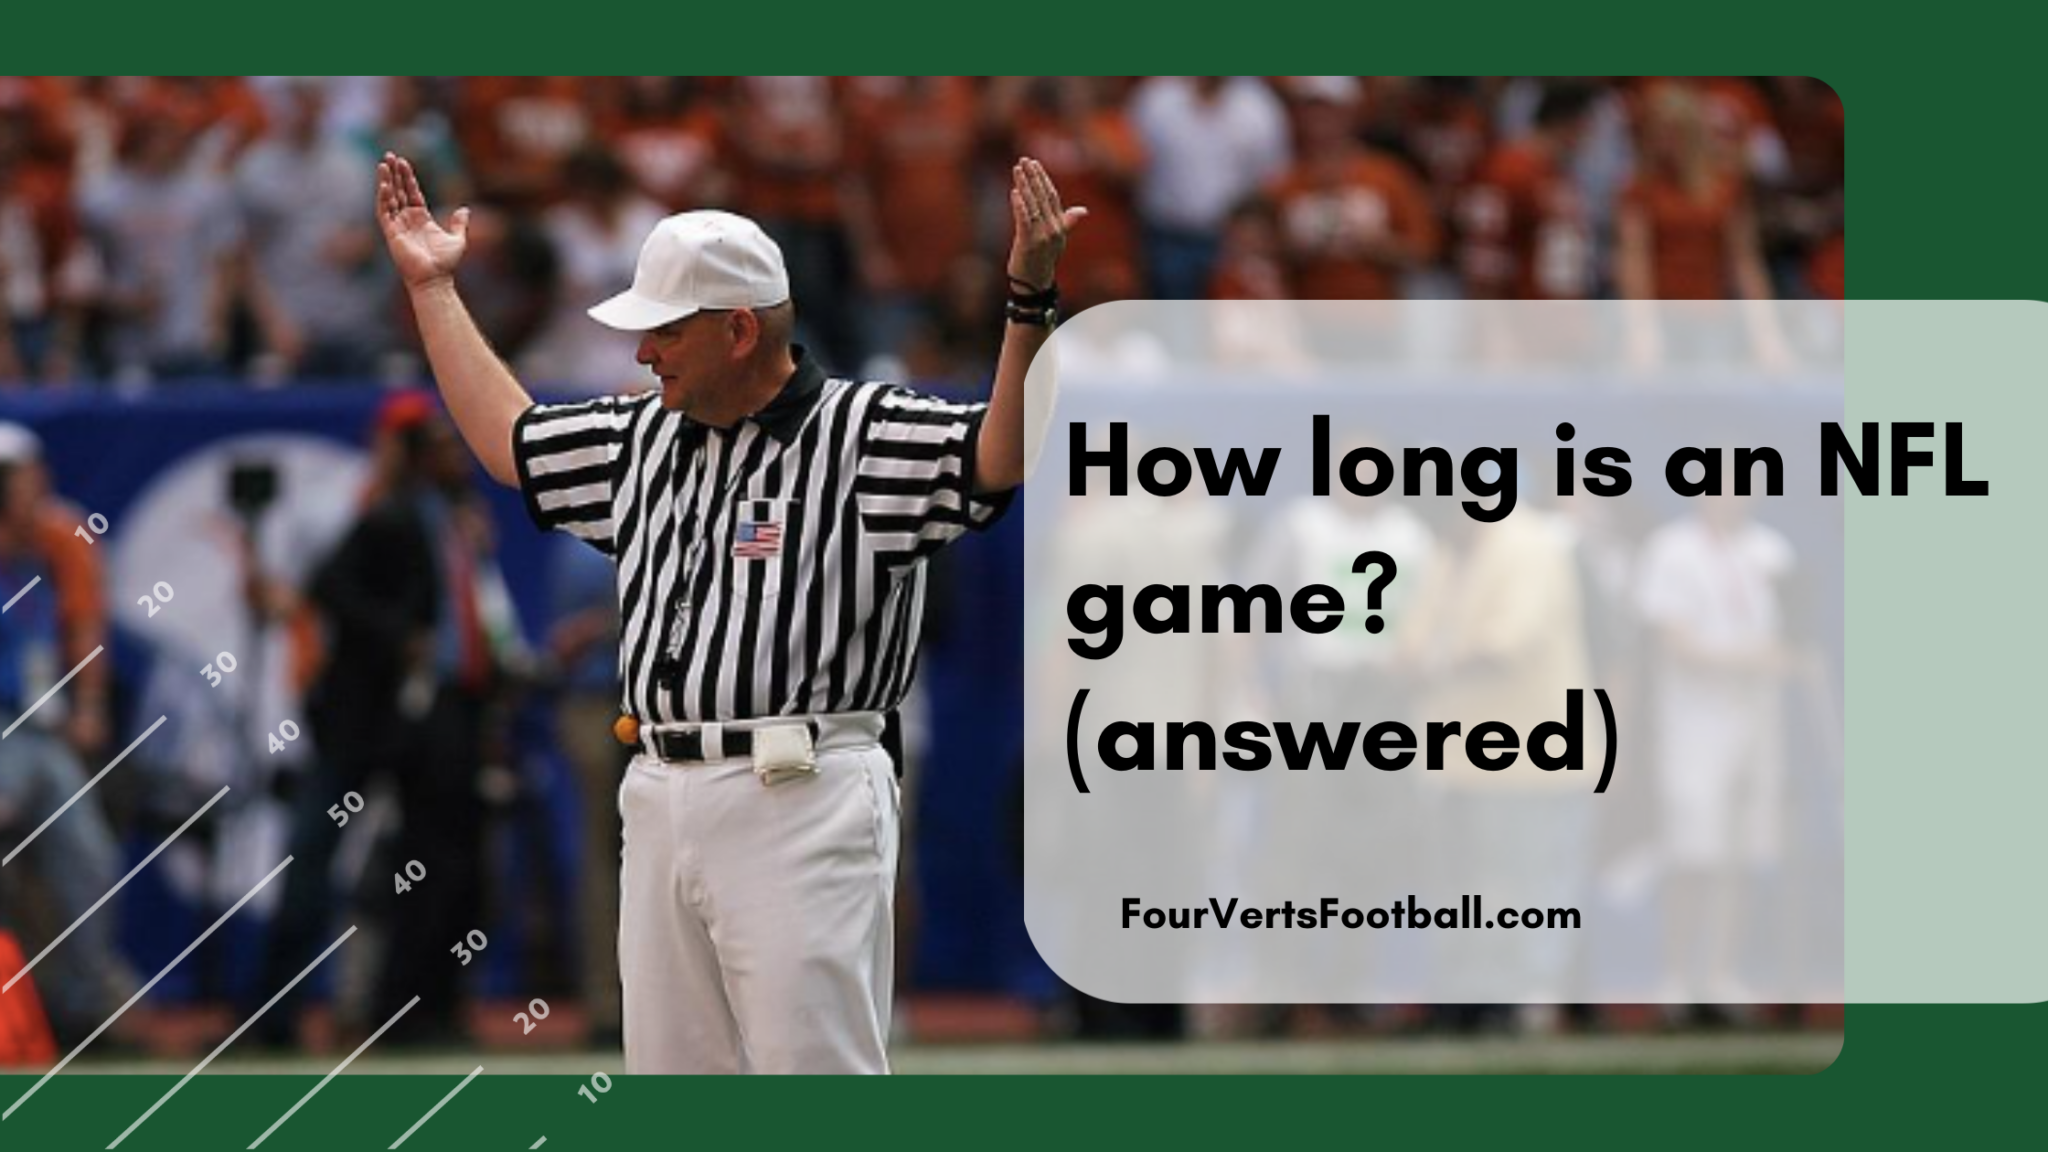 How long is an NFL game? - Four Verts Football